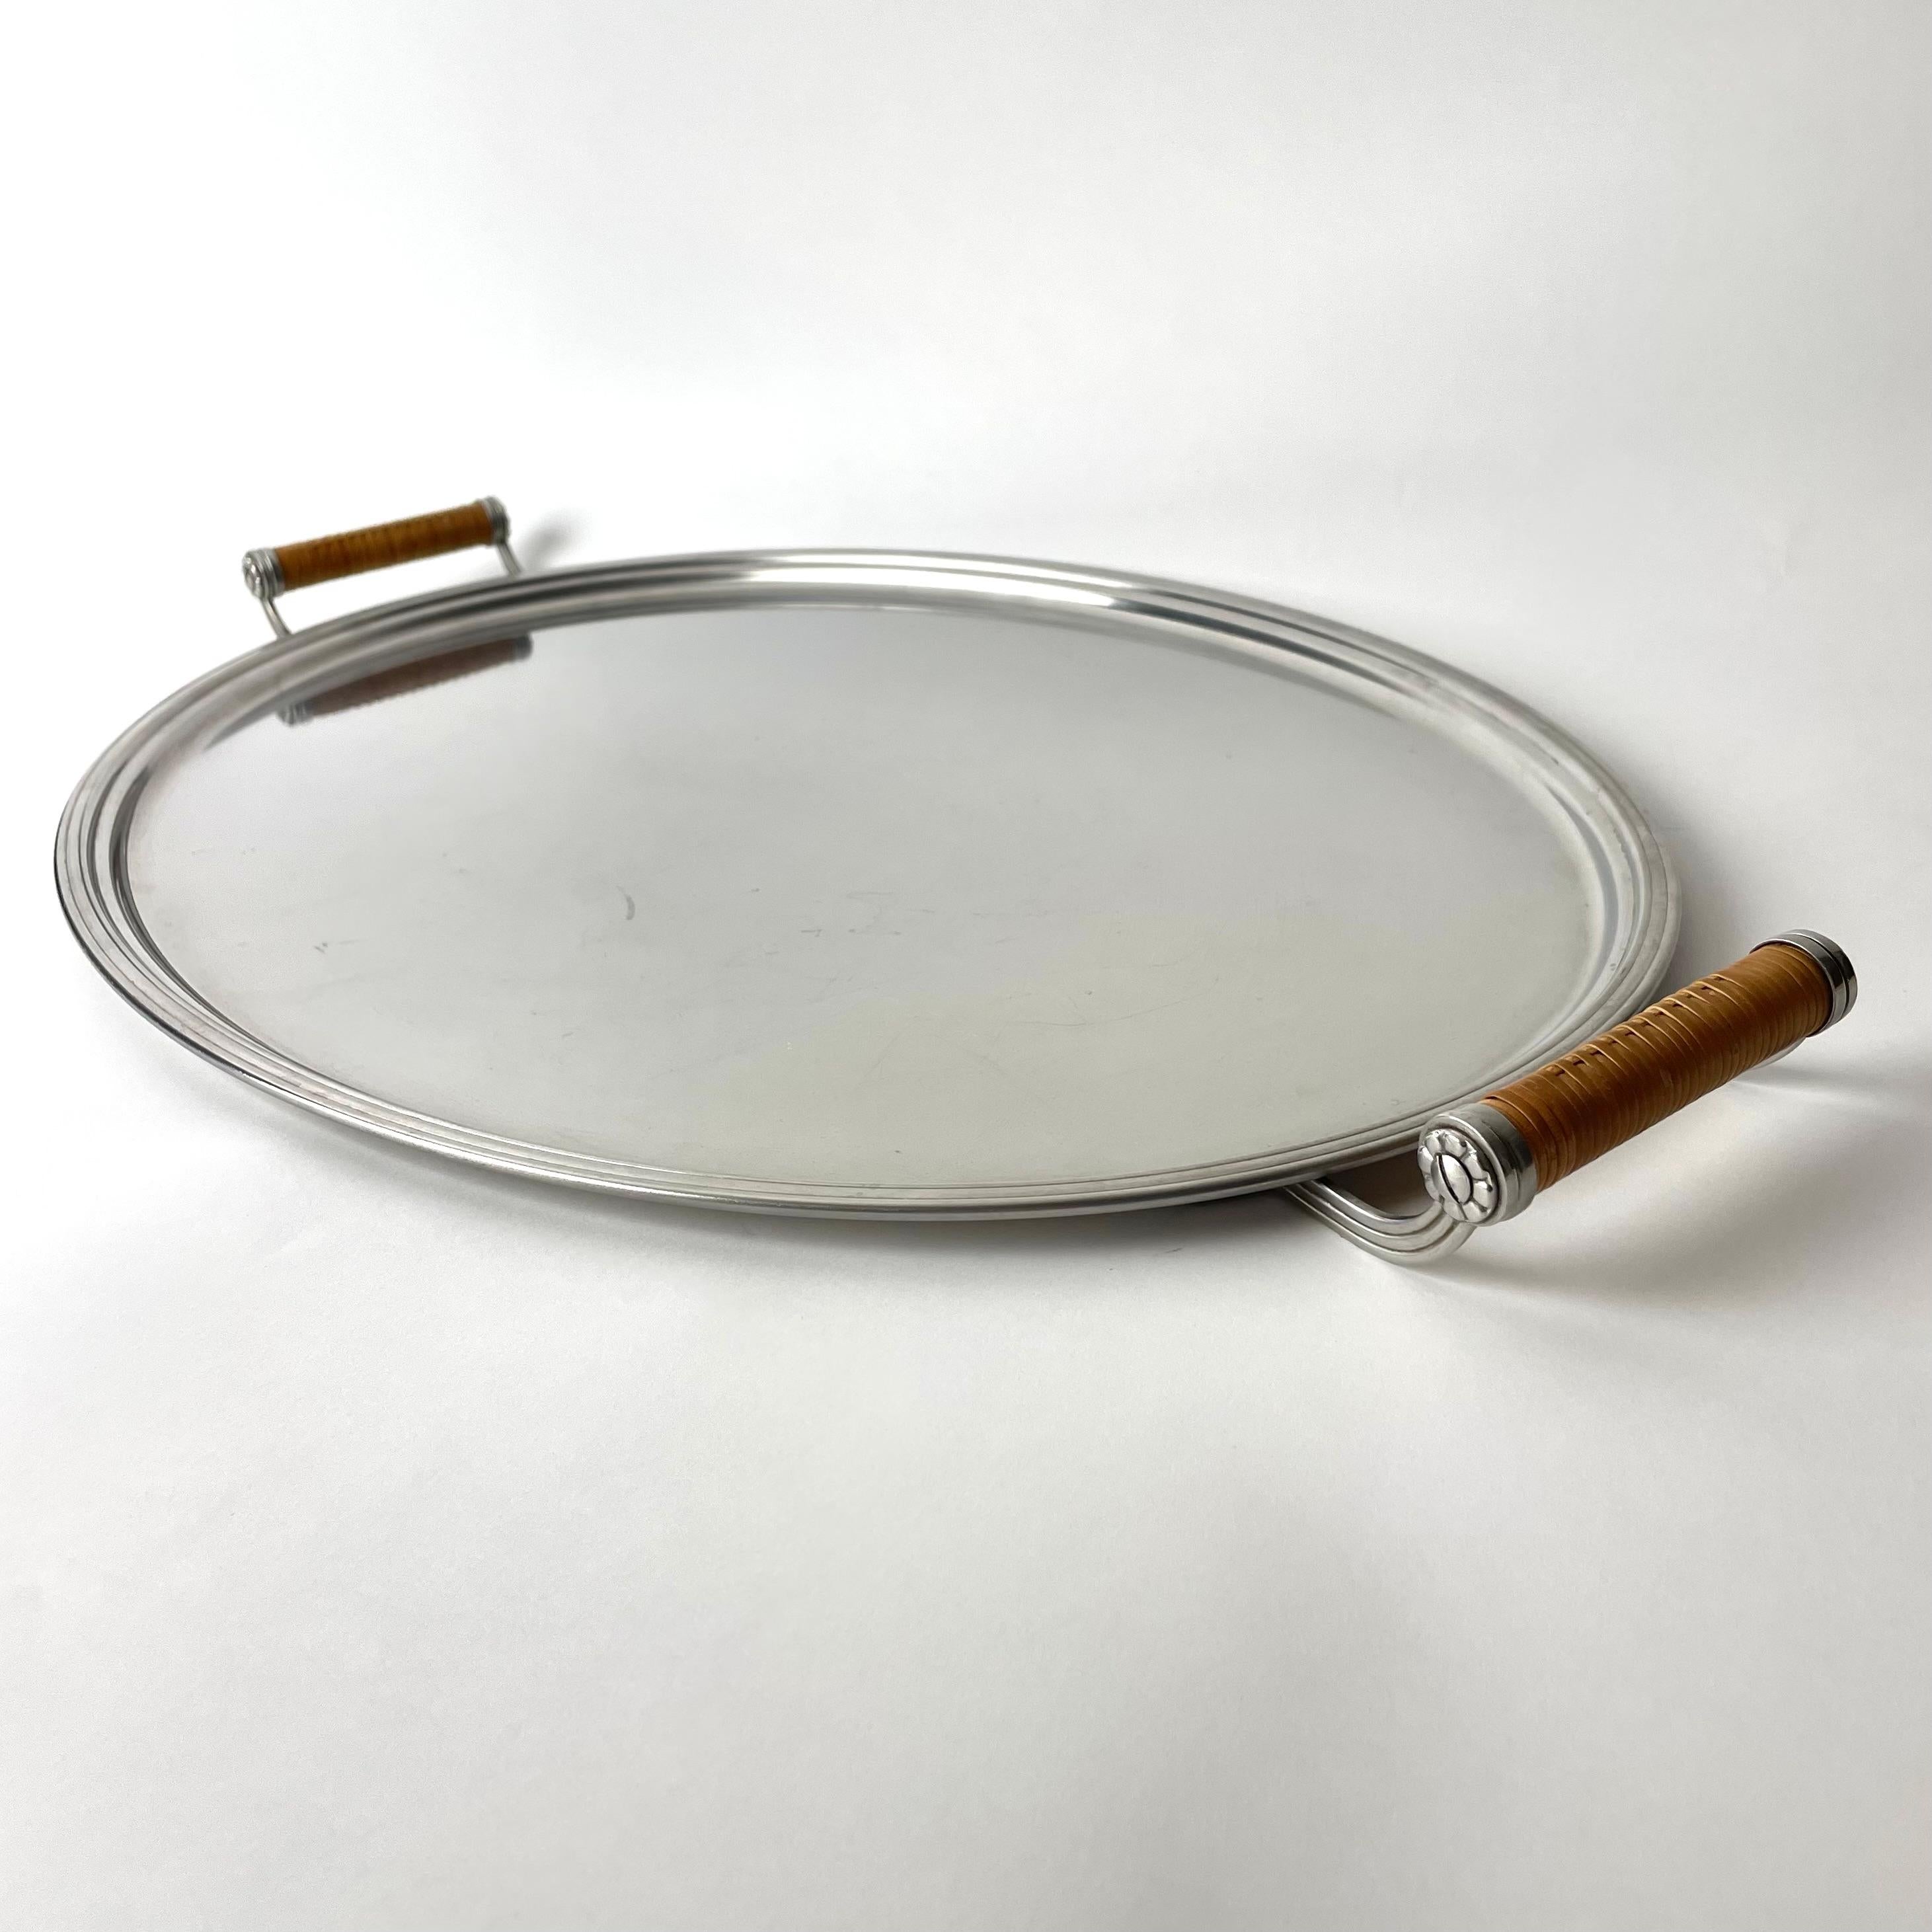 Art Deco Stainless Steel Tray with Rattan-Wrapped Handles, Swedish Grace by pioneer Gense For Sale